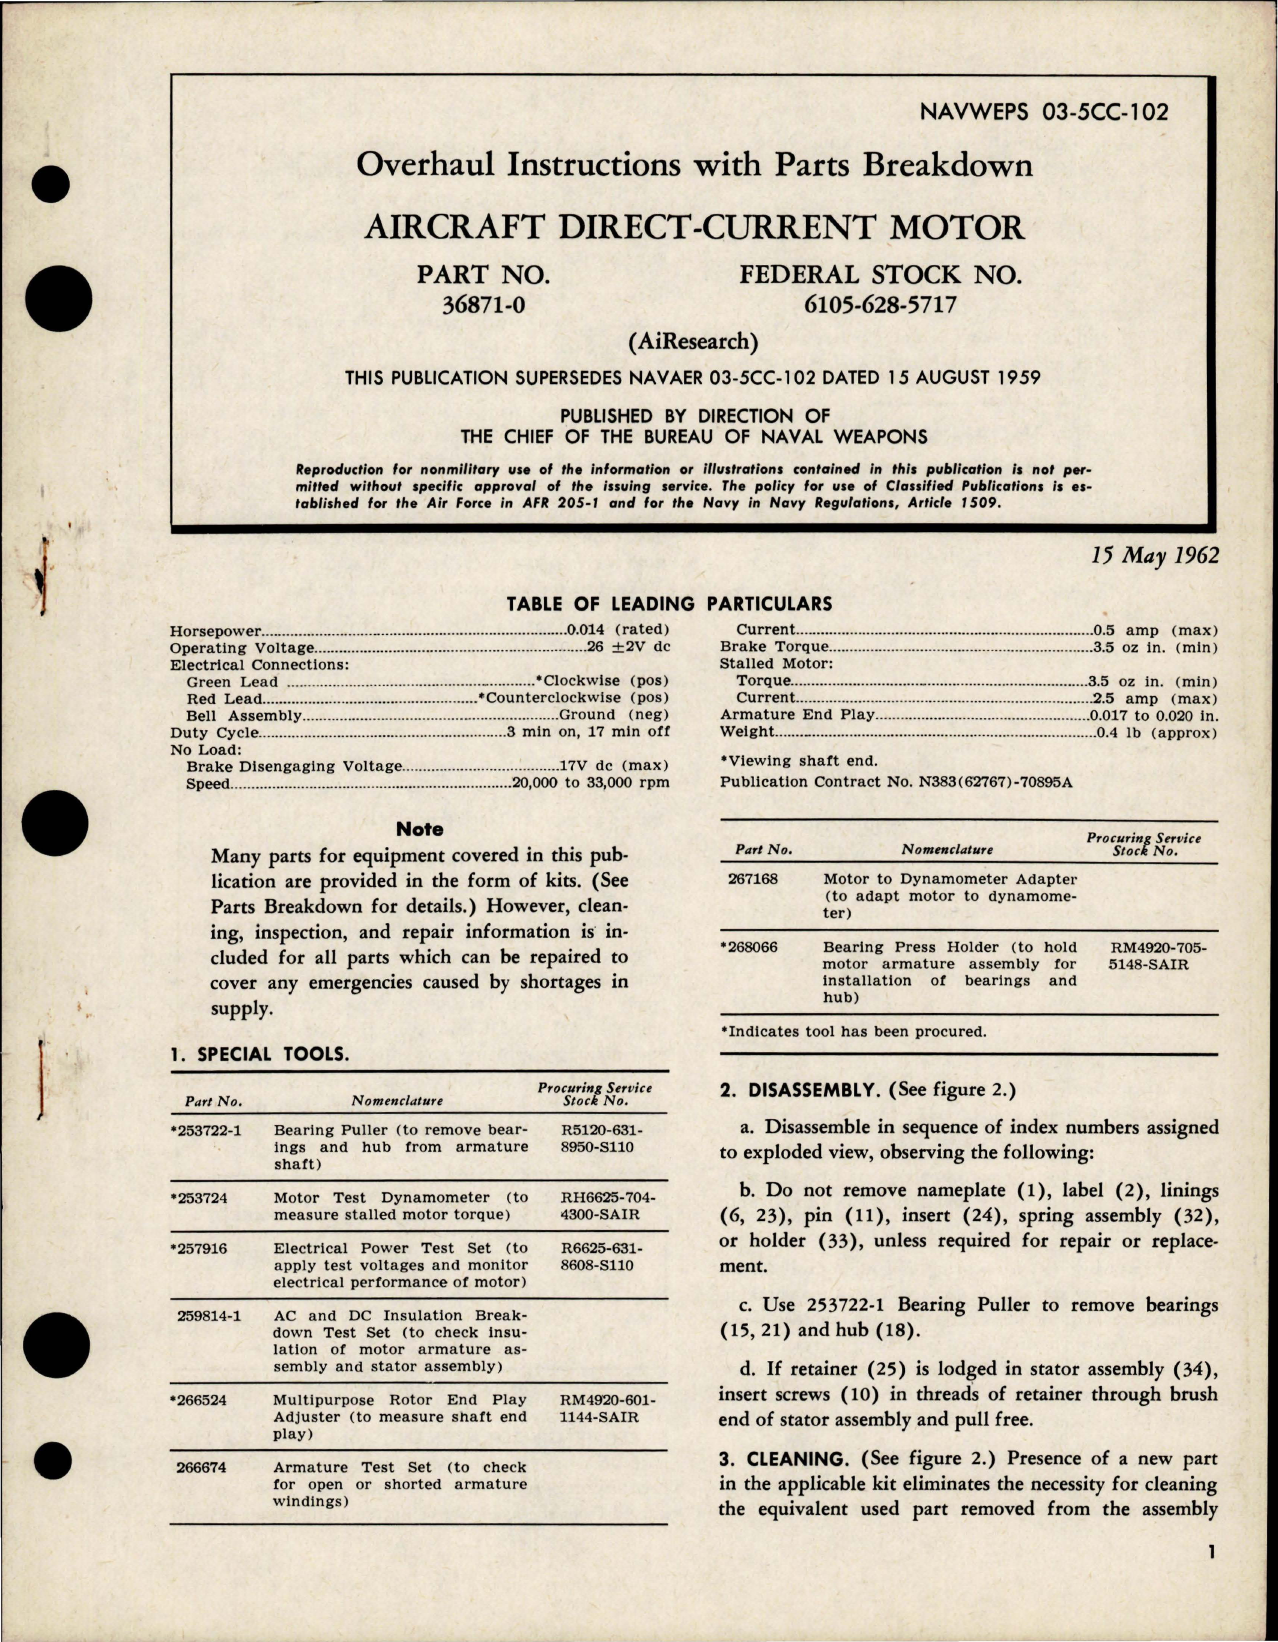 Sample page 1 from AirCorps Library document: Overhaul Instructions with Parts Breakdown for Direct Current Motor - Part 36871-0 